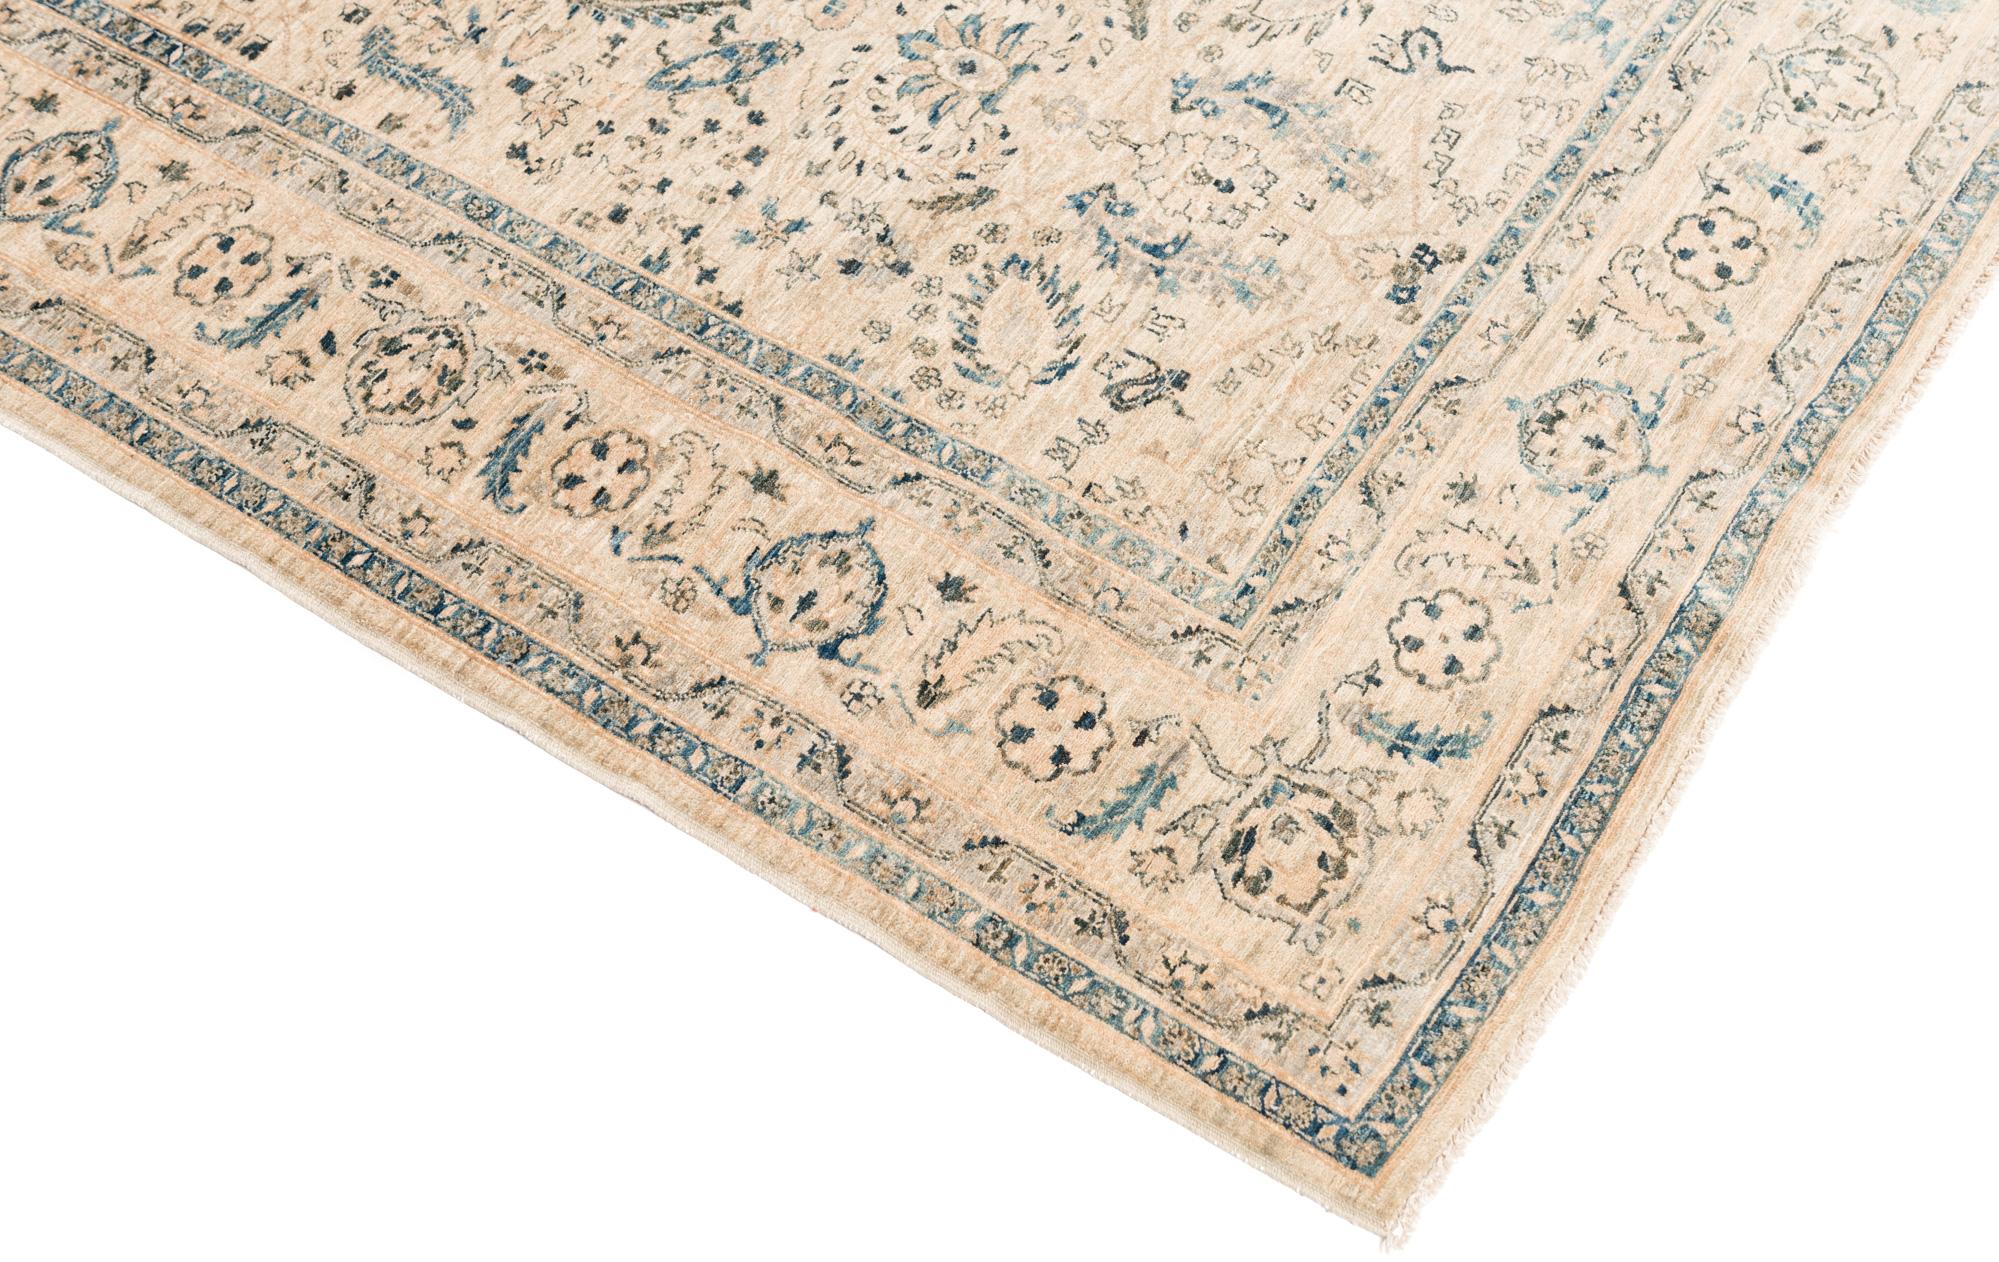 Hand-Knotted New Afghan Transitional Rug Handwoven with Ivory and Blue Wool